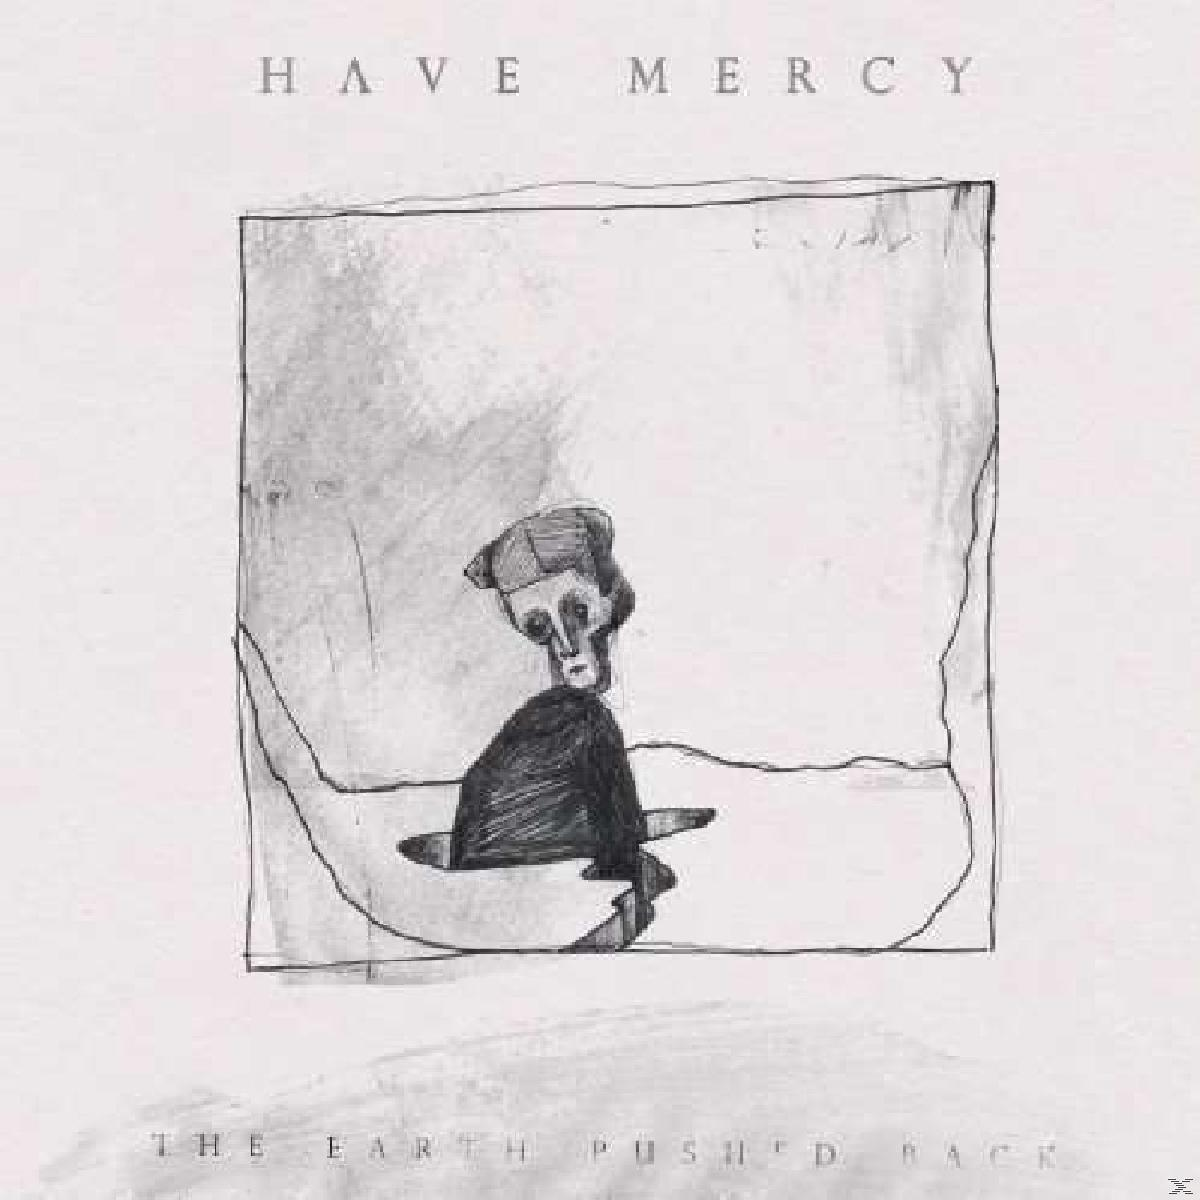 Have Back (CD) - The Earth Pushed - Mercy